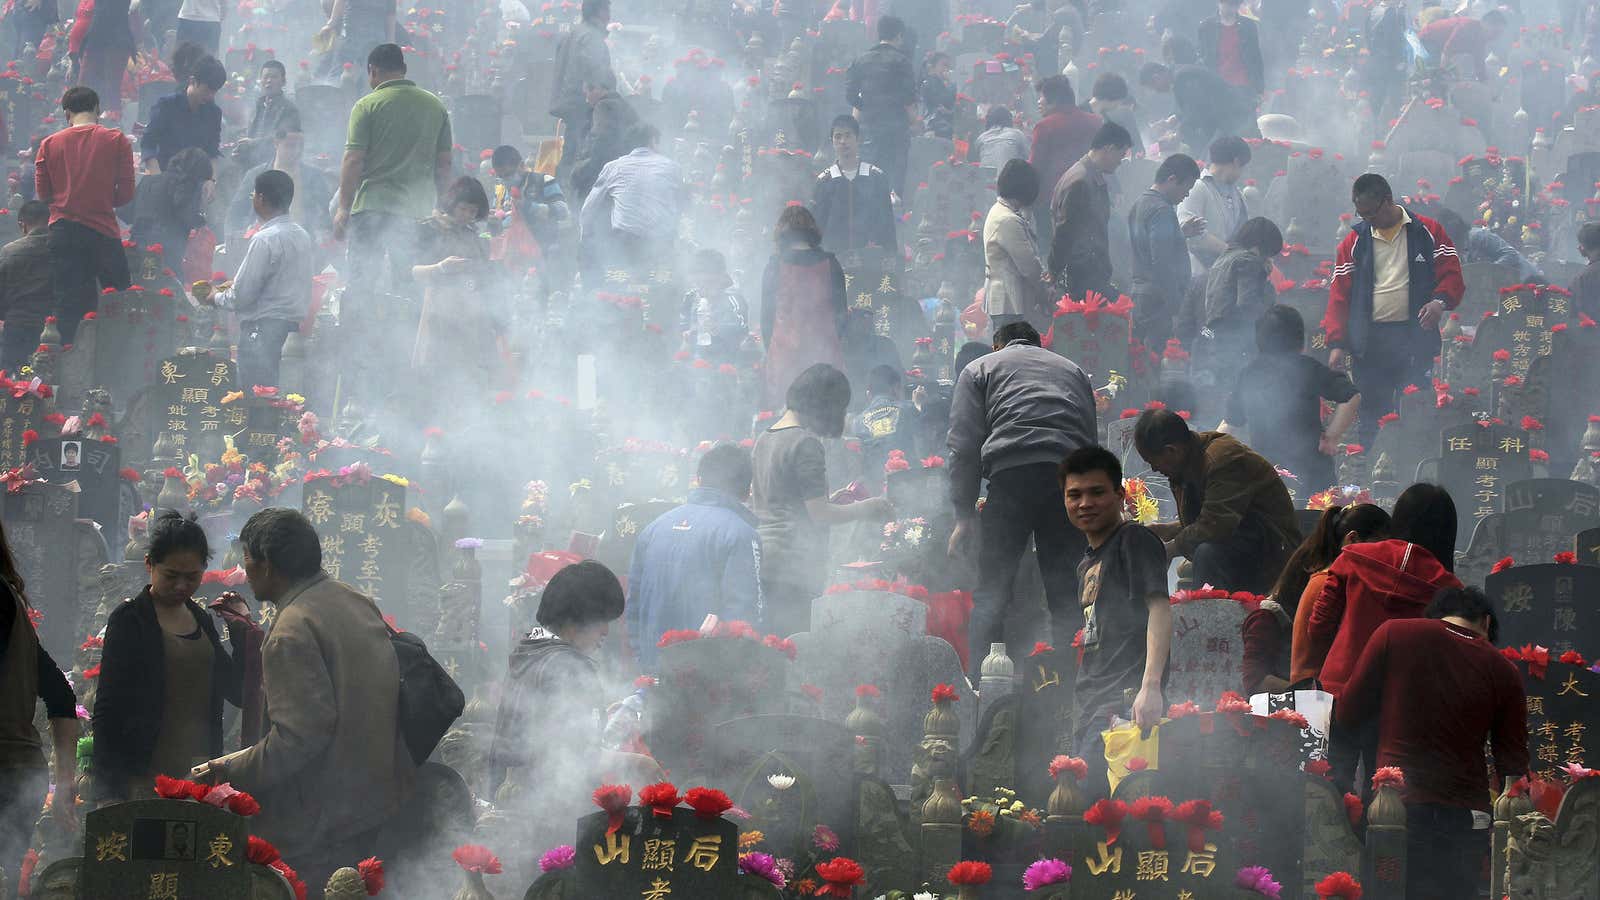 A smoky Tomb Sweeping day in China.